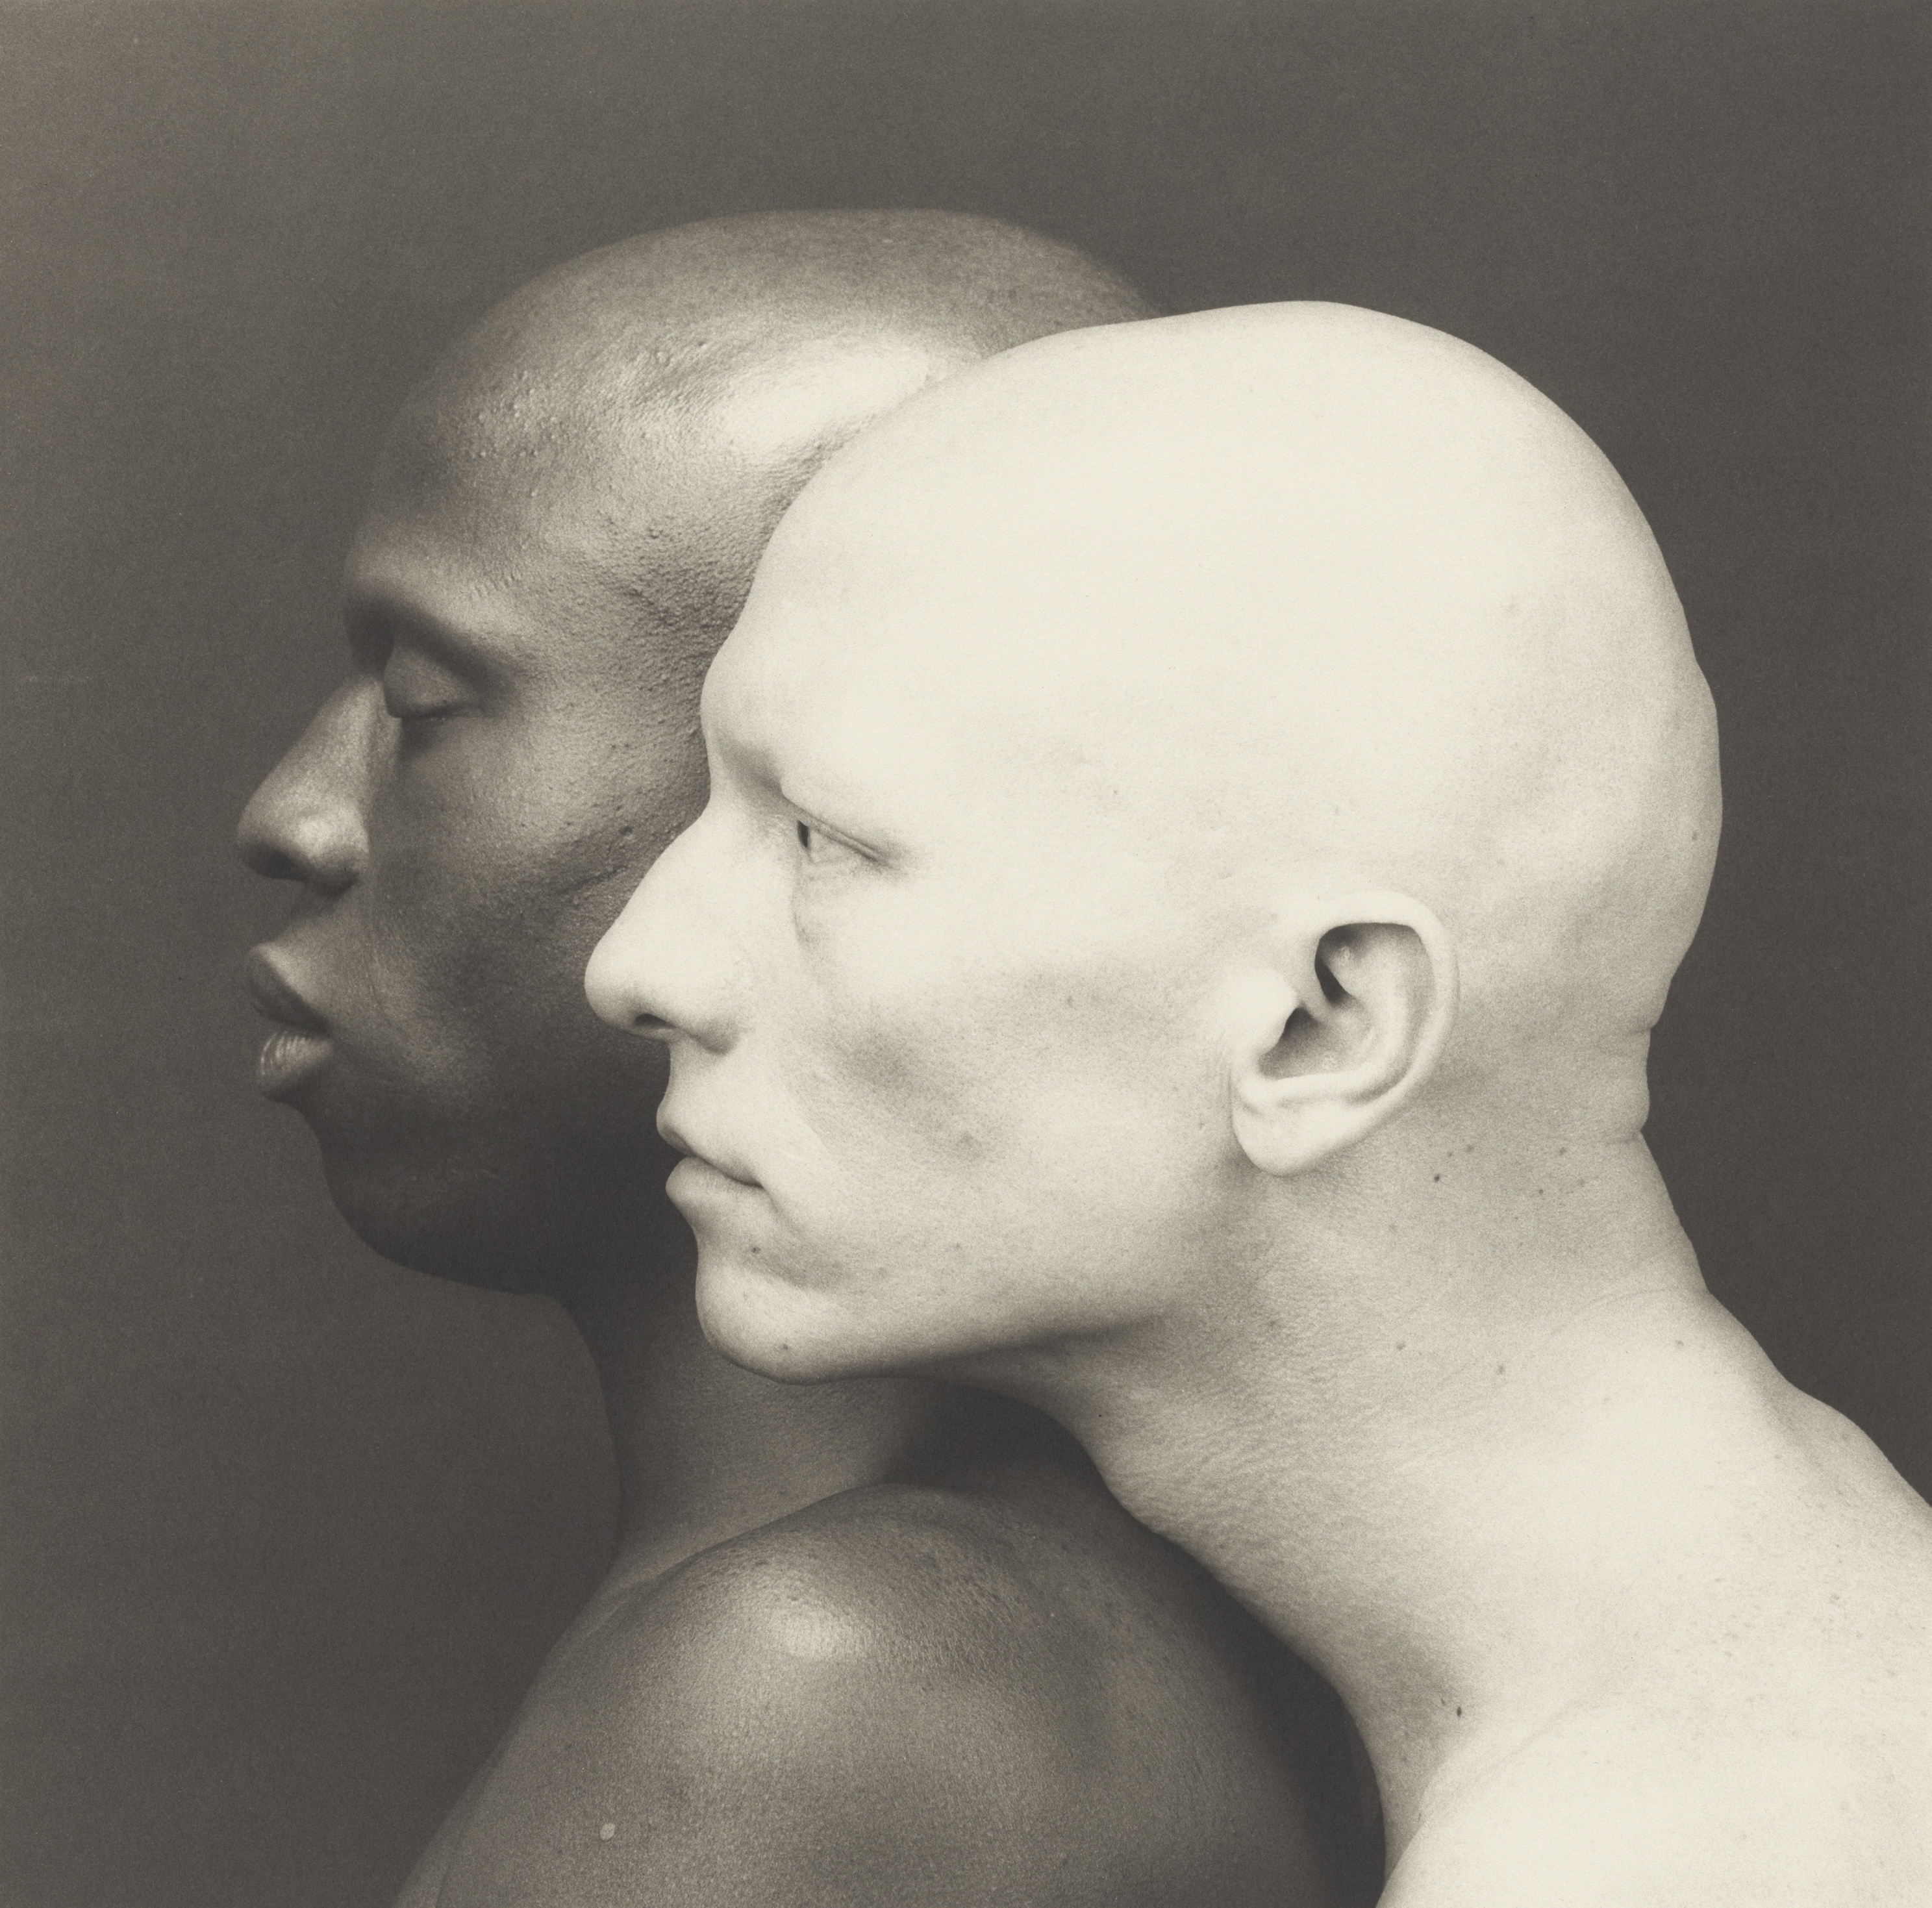 Black and white portrait of two bald men standing profile against a studio backdrop.